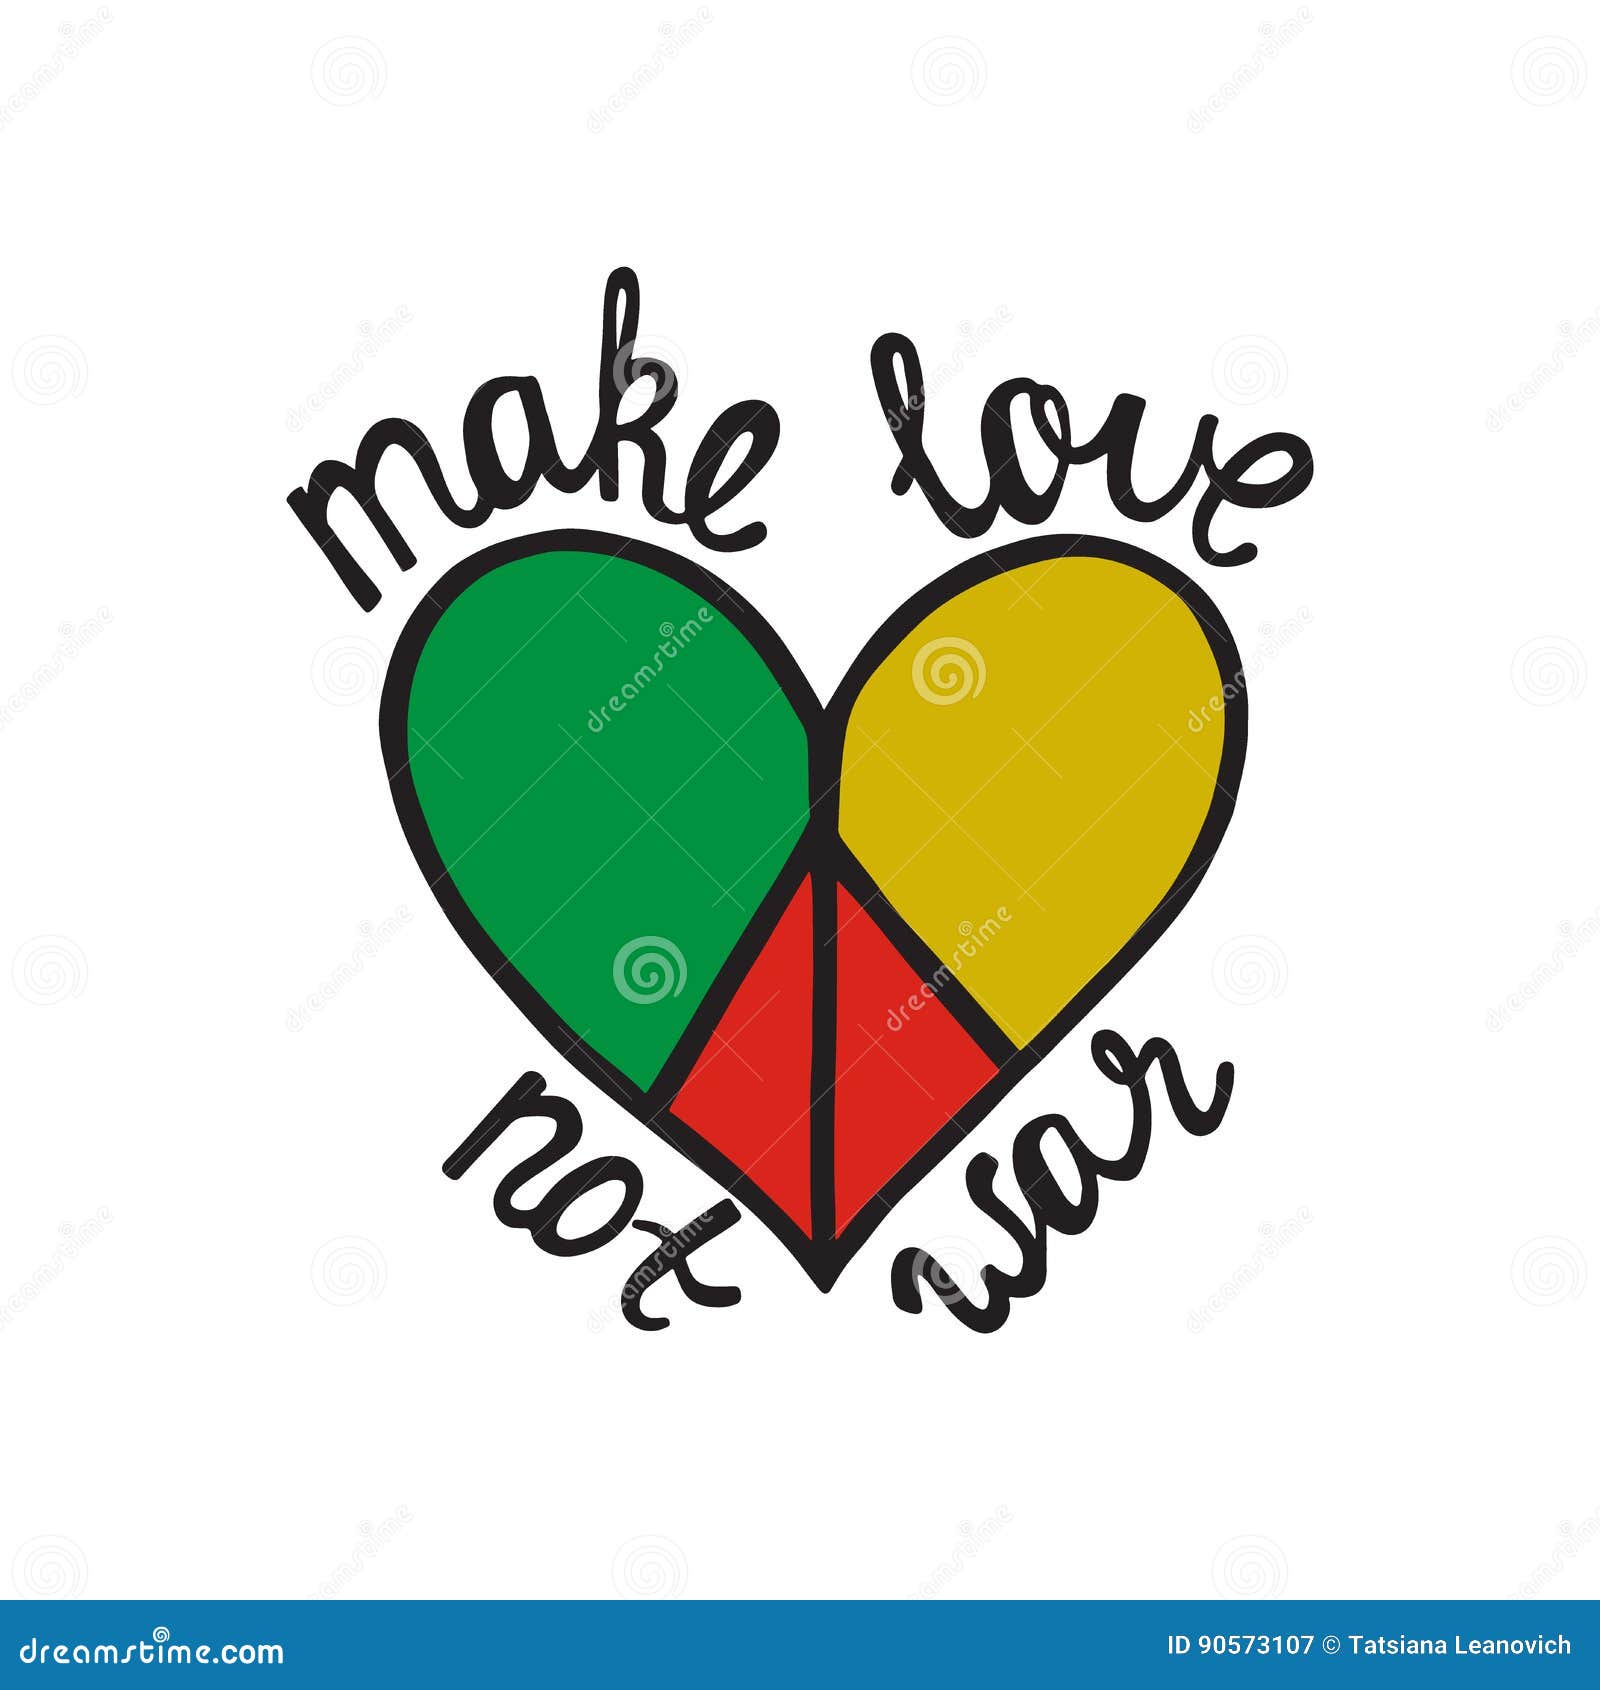 Make Love Not War Inspirational Quote About Peace Stock Vector Illustration Of Inspirational Positive